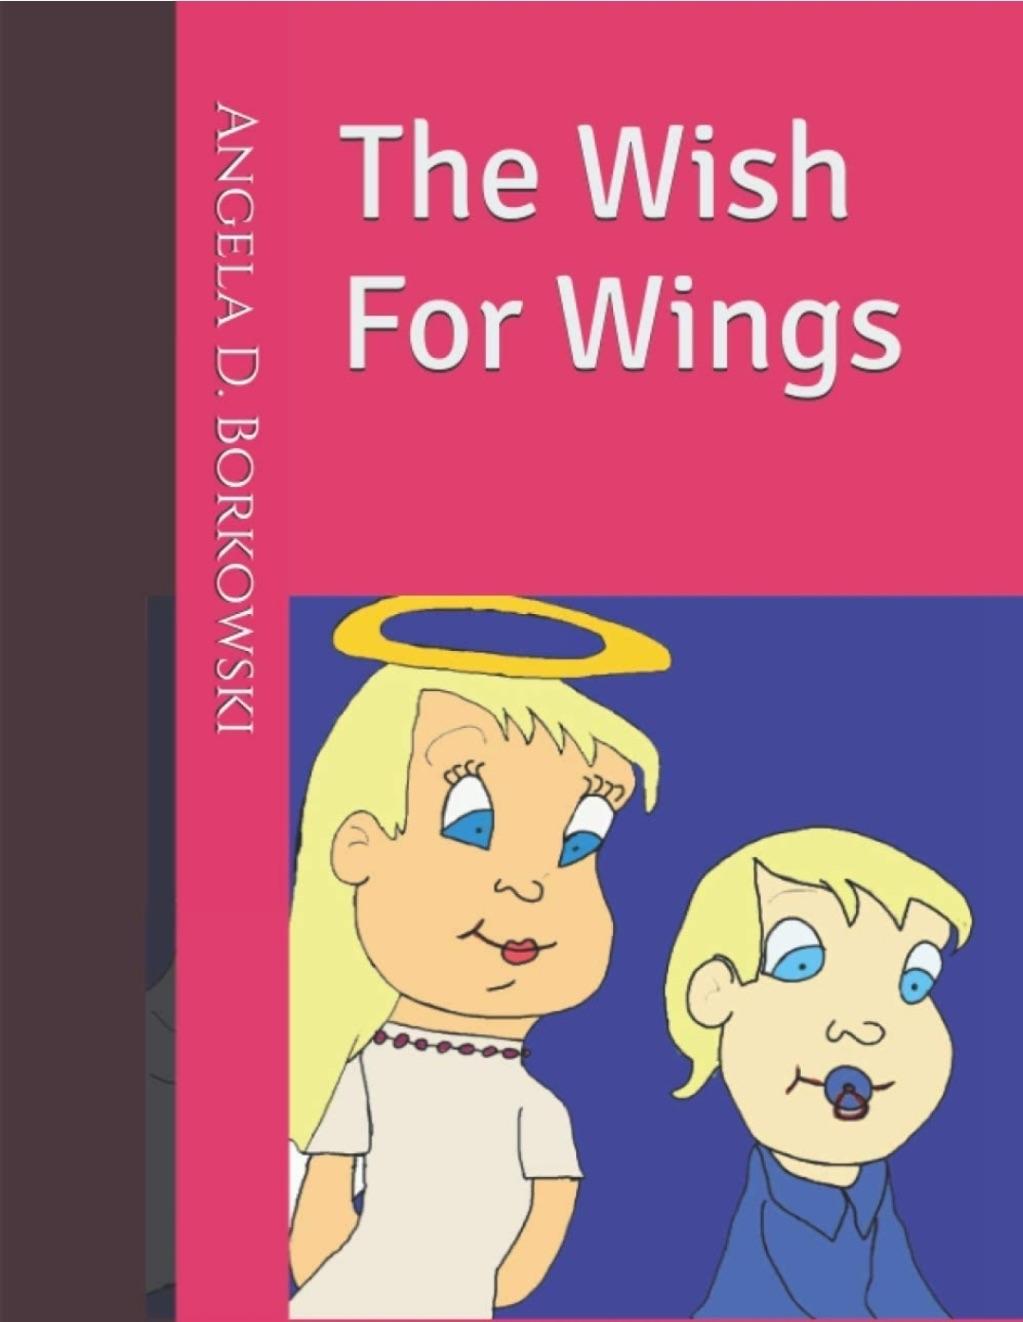 The Wish For Wings - Children's Book by Angela Borko...